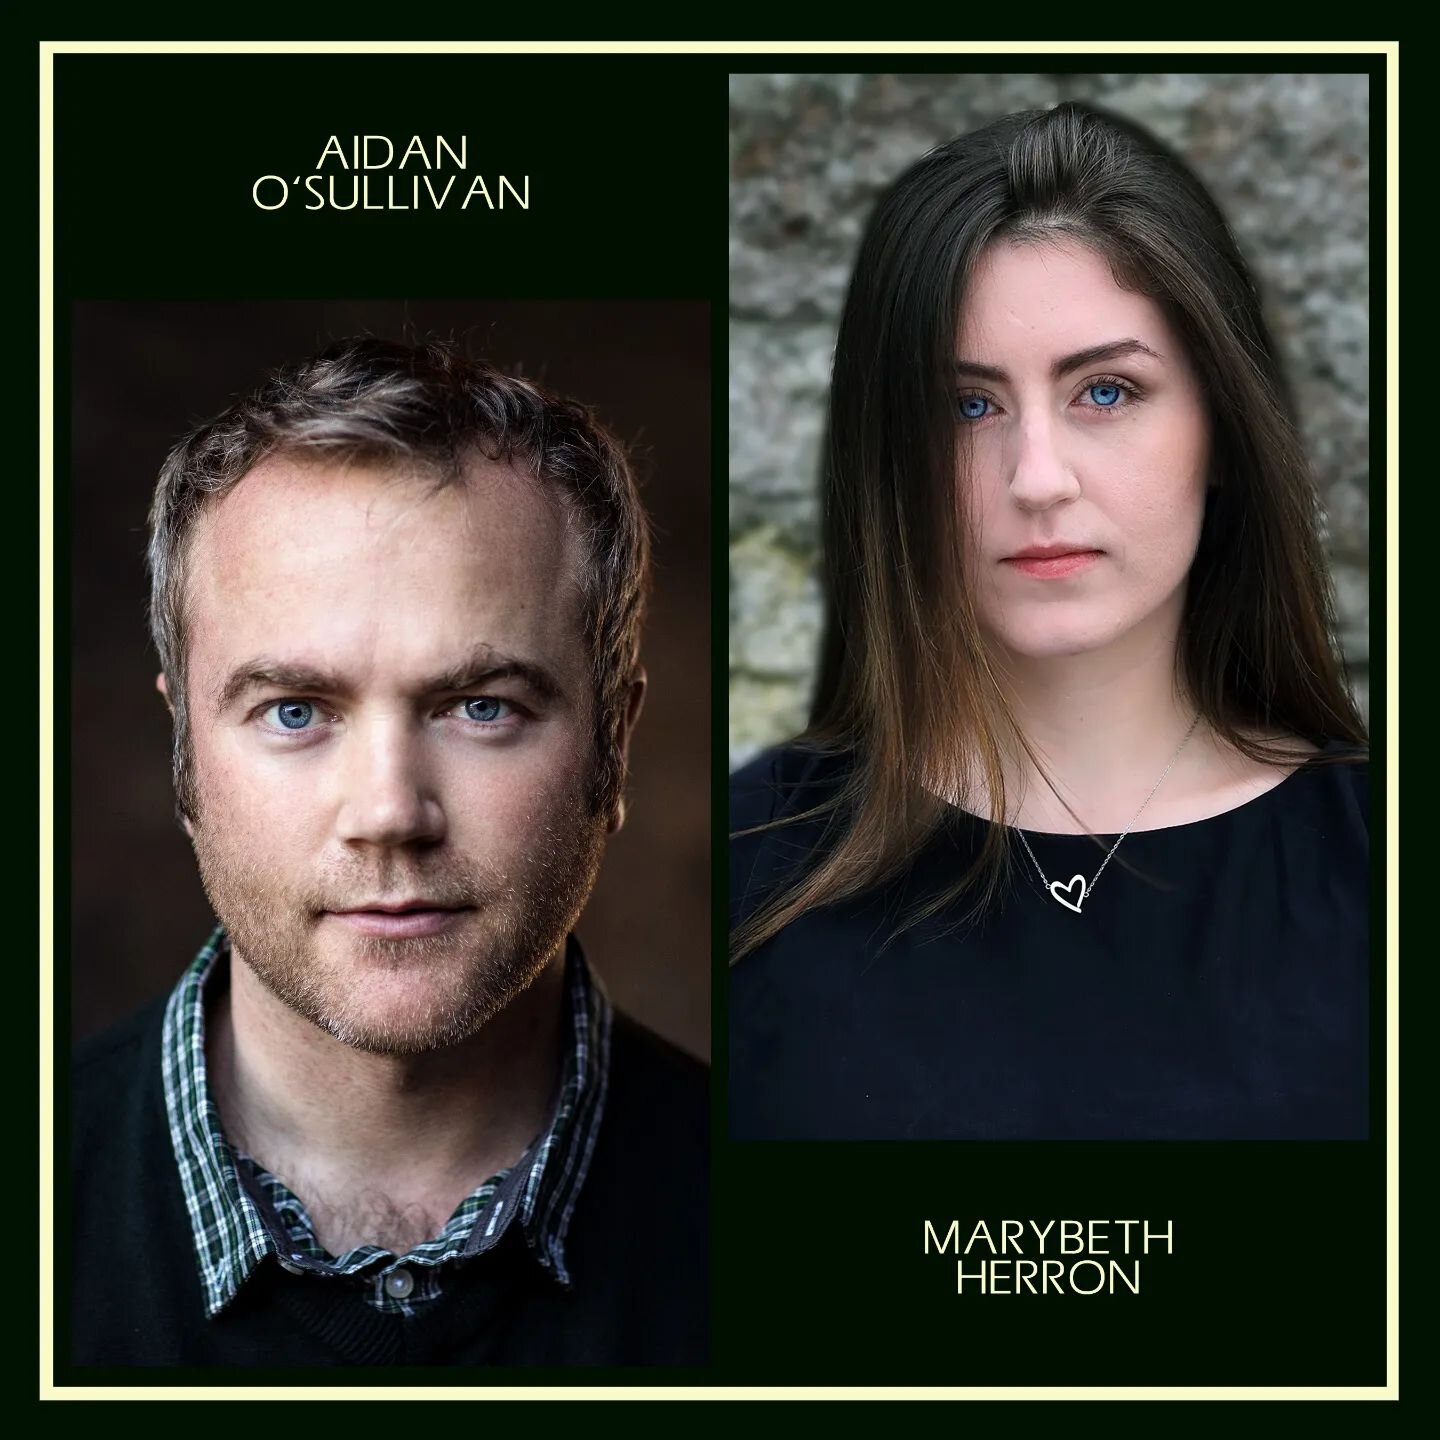 💛 DONEGAL DUO DELIGHTED 💚

Our dear friends and cast members Marybeth Herron... oh wait... Marybeth Kings! 💍... and Aidan O'Sullivan, both hailing from the Forgotten County, have messages to share ahead of the screening of Follow the Dead in Bally